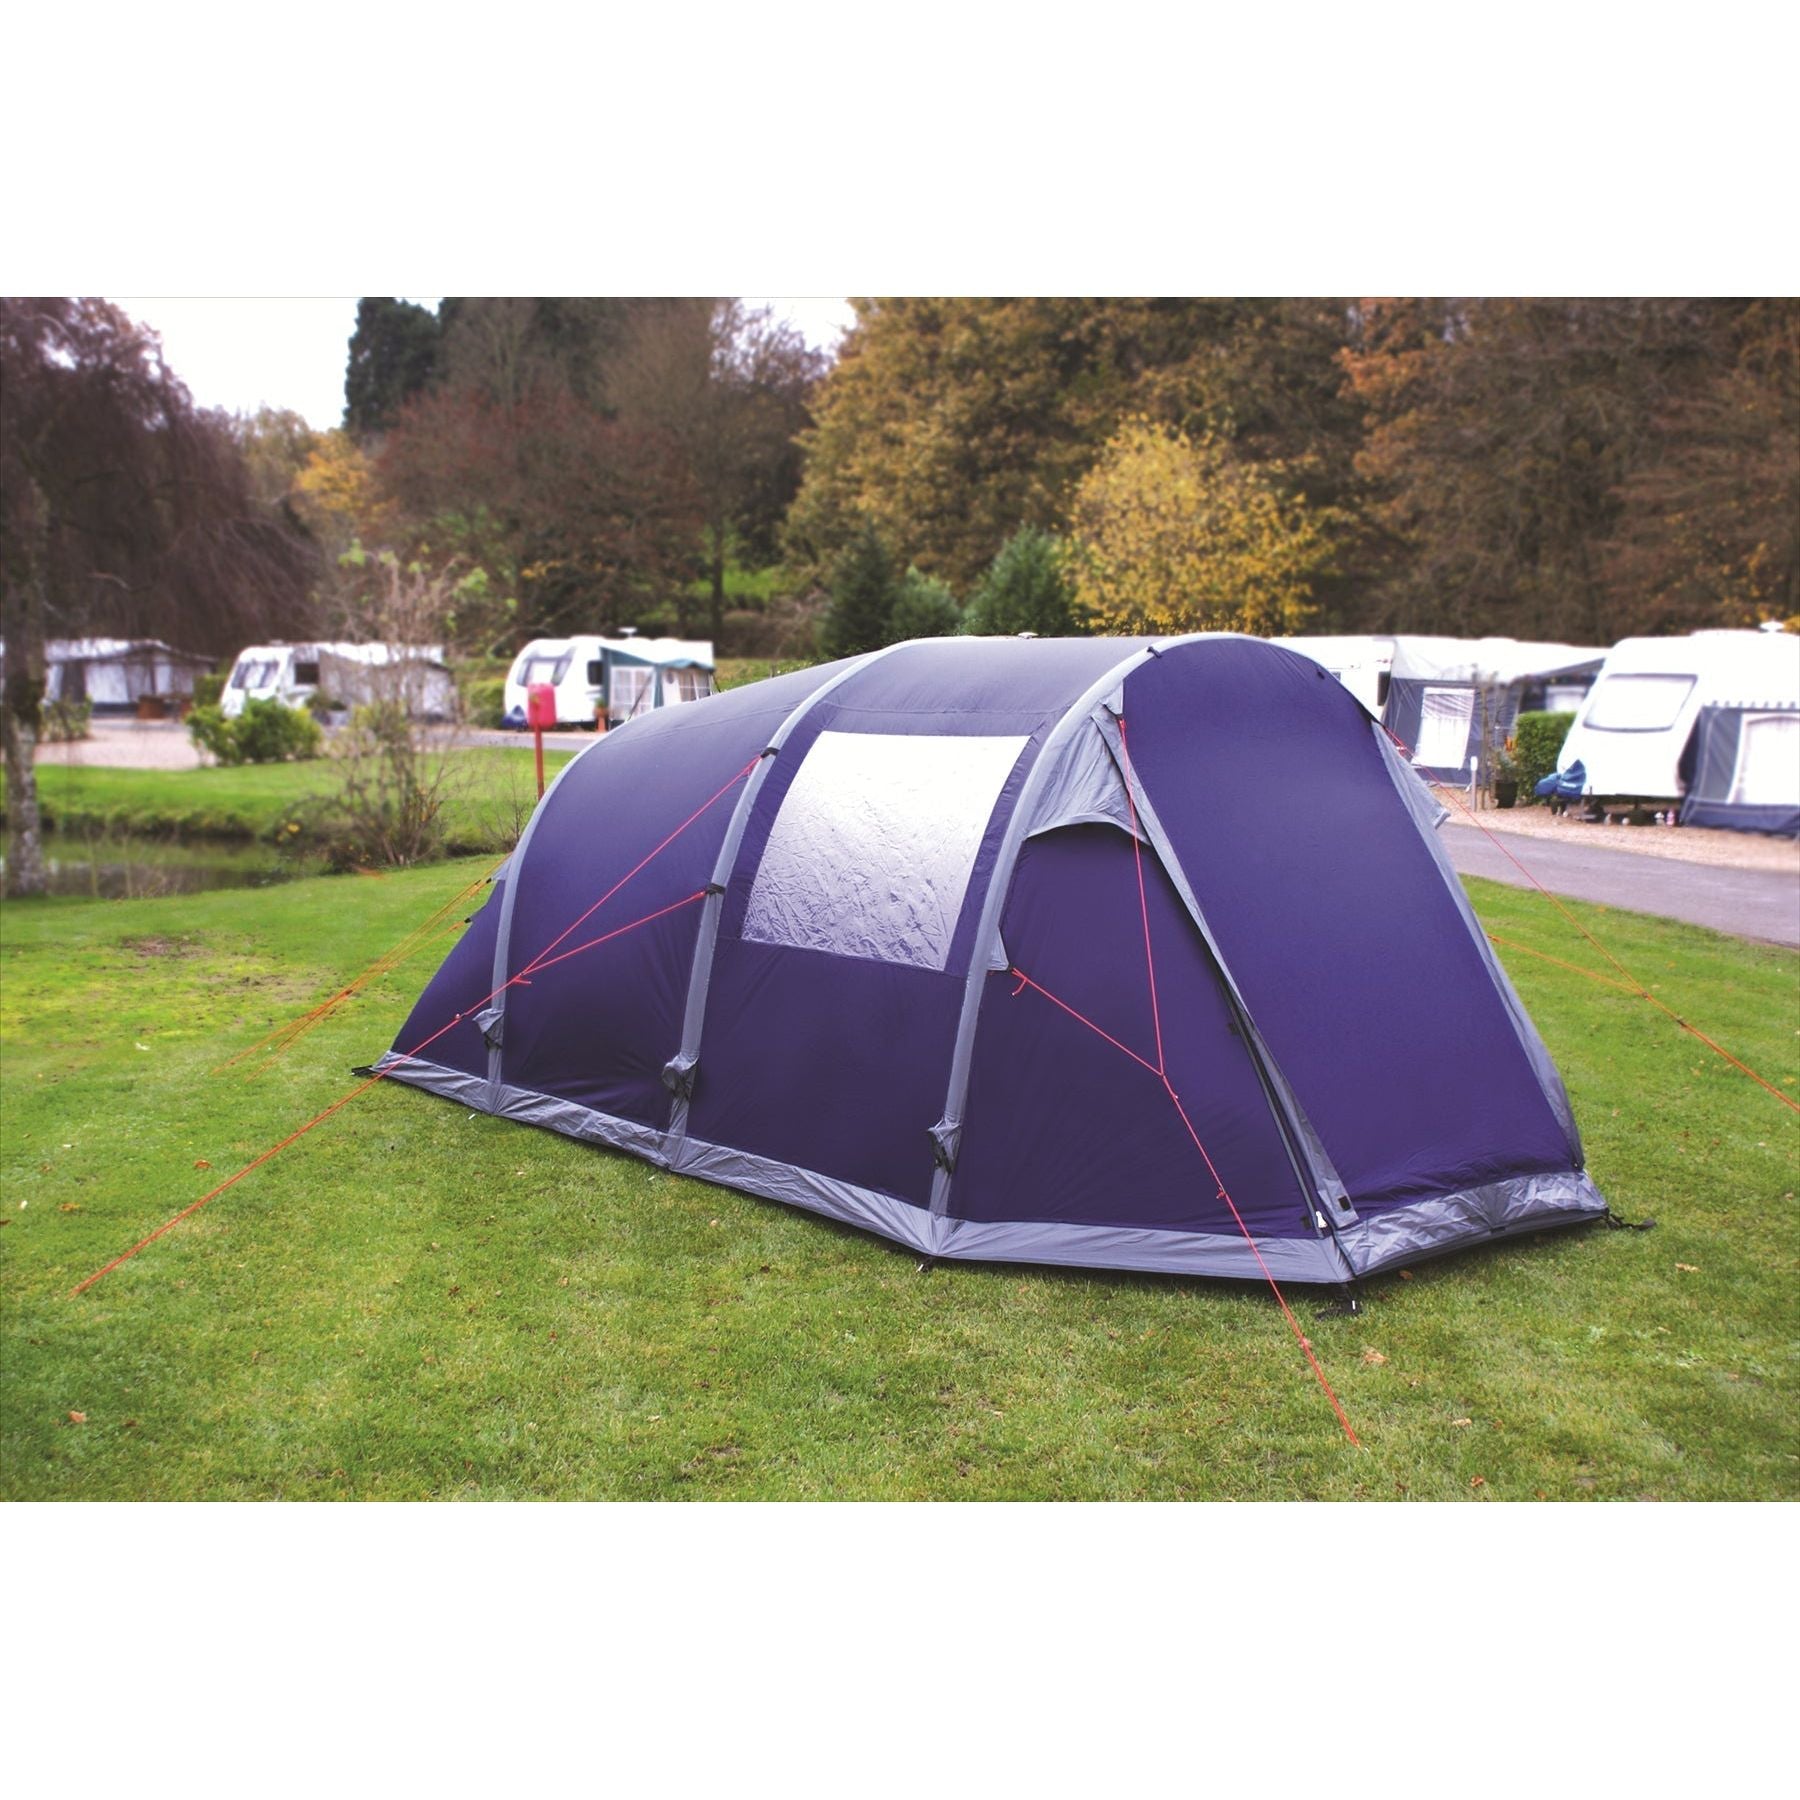 OLYMPUS AIR TENT 6 PERSON MAN INFLATABLE TENT INC PUMP AND CARRY